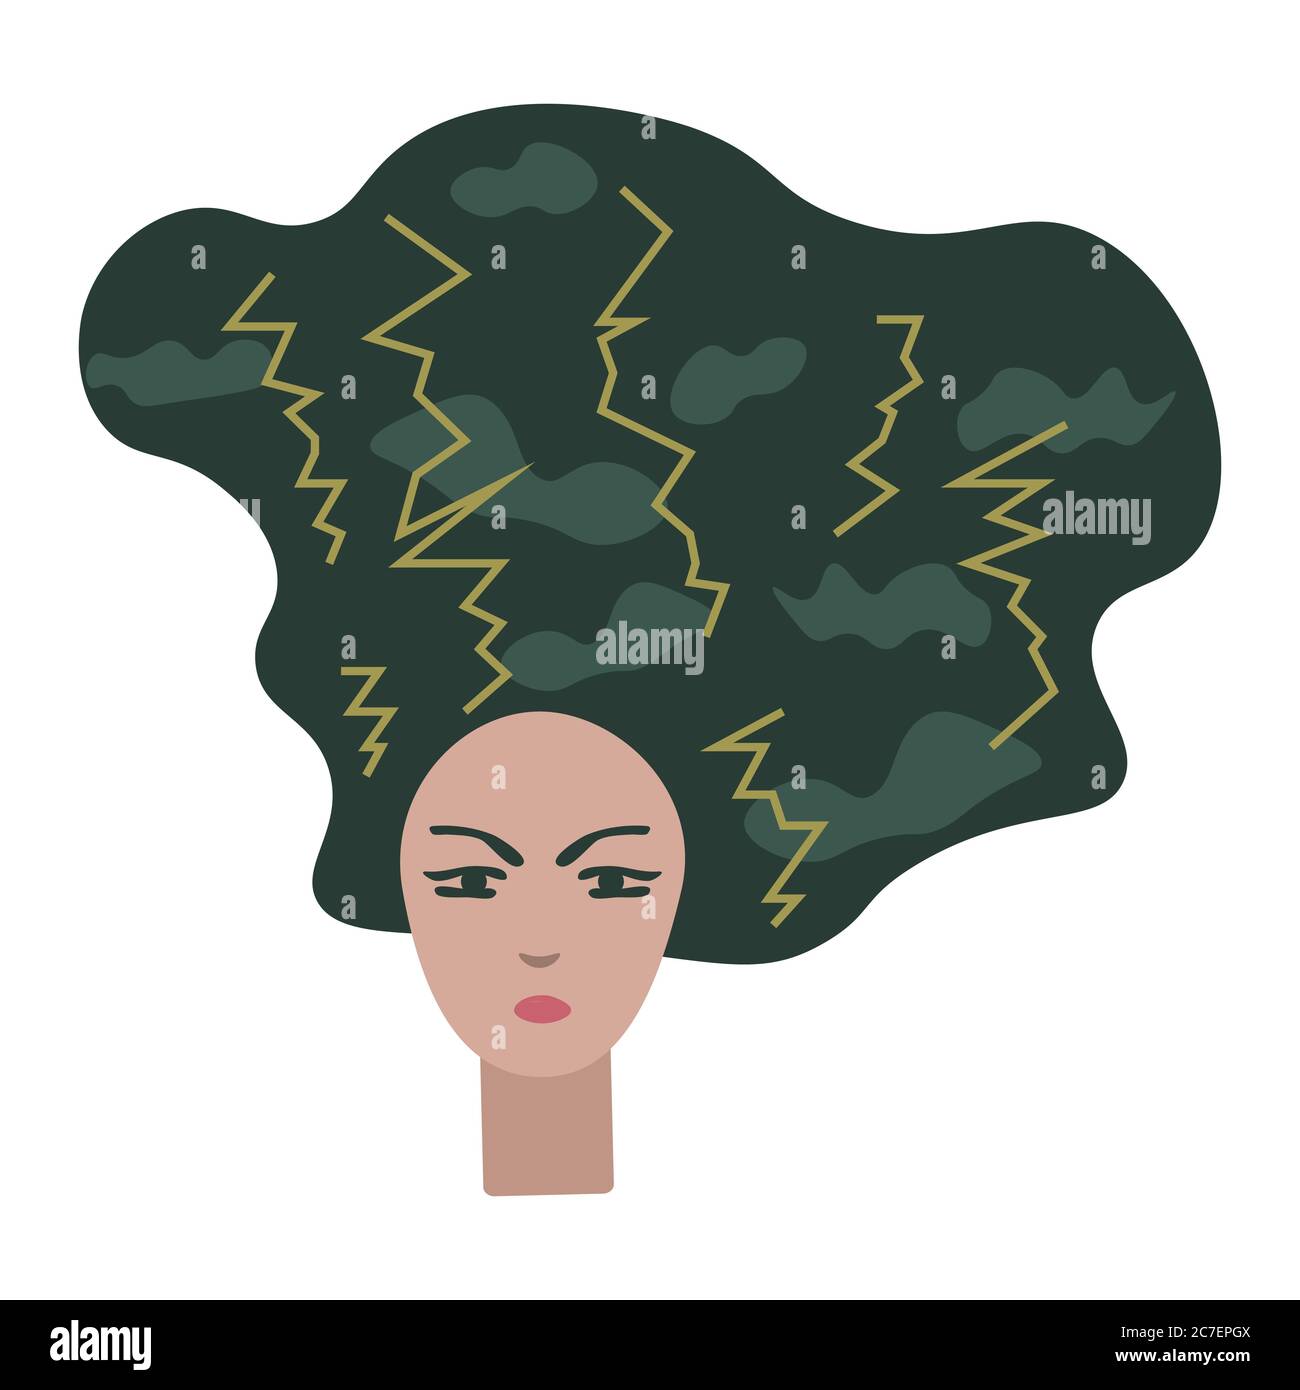 Angry woman illustration with head as stormy cloud Stock Vector